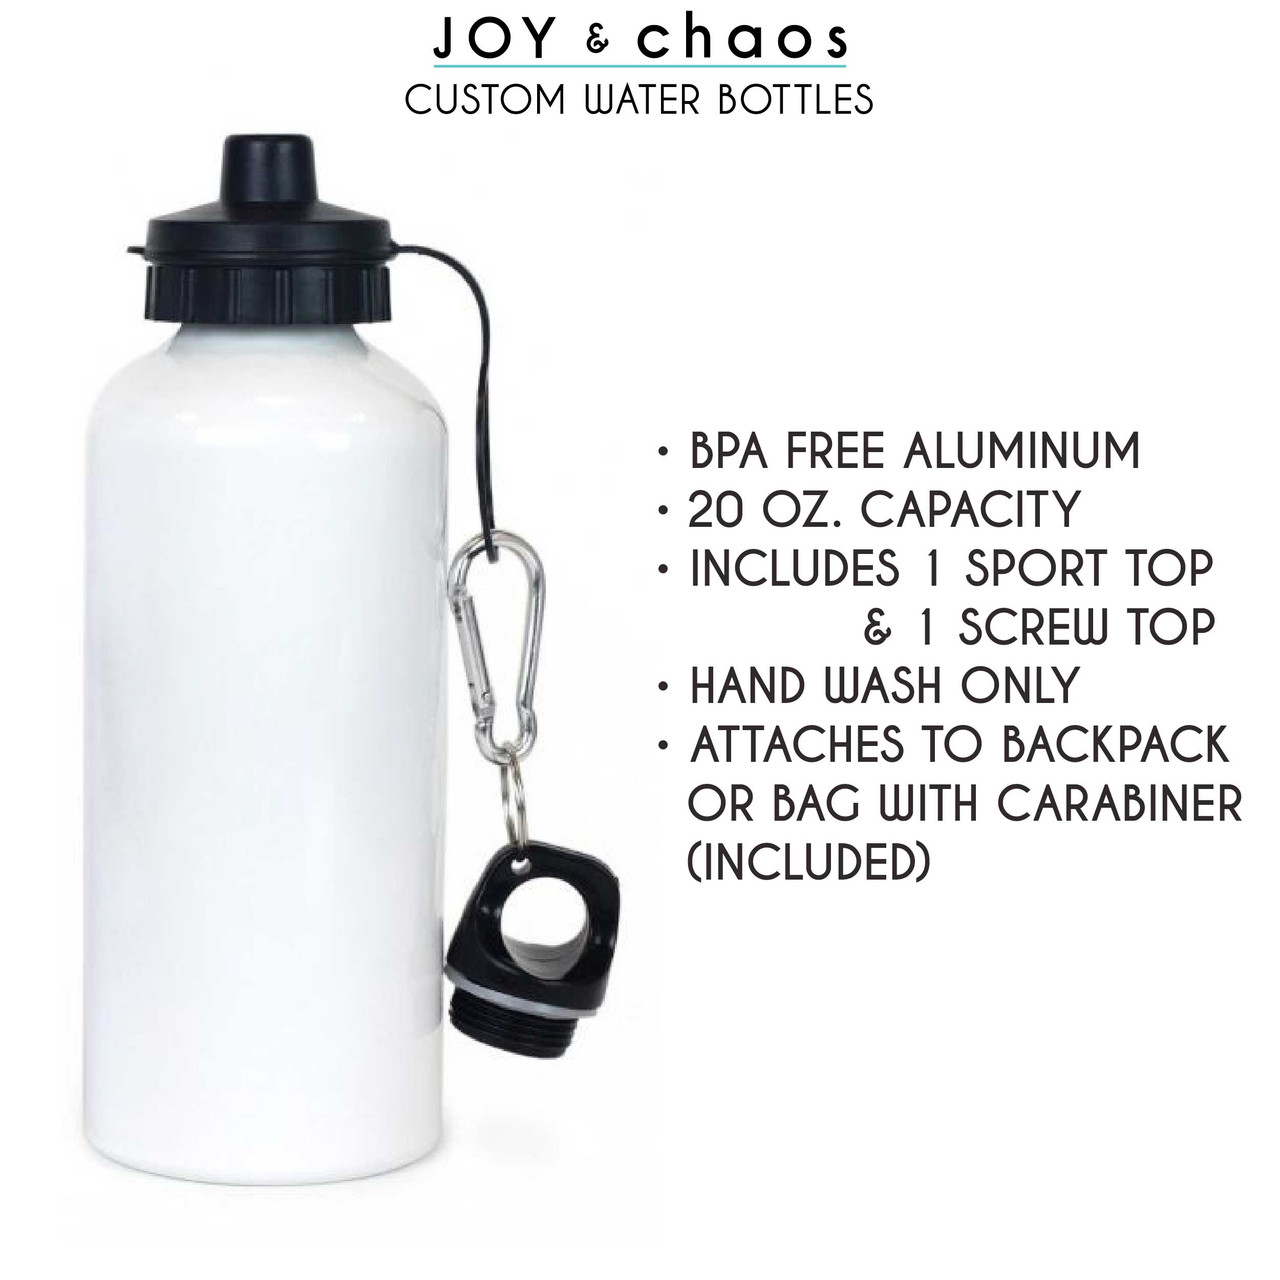 https://cdn11.bigcommerce.com/s-5grzuu6/images/stencil/1280x1280/products/6242/49078/Personalized-Aluminum-Water-Bottles-Joy--Chaos__61823.1659724426.jpg?c=2